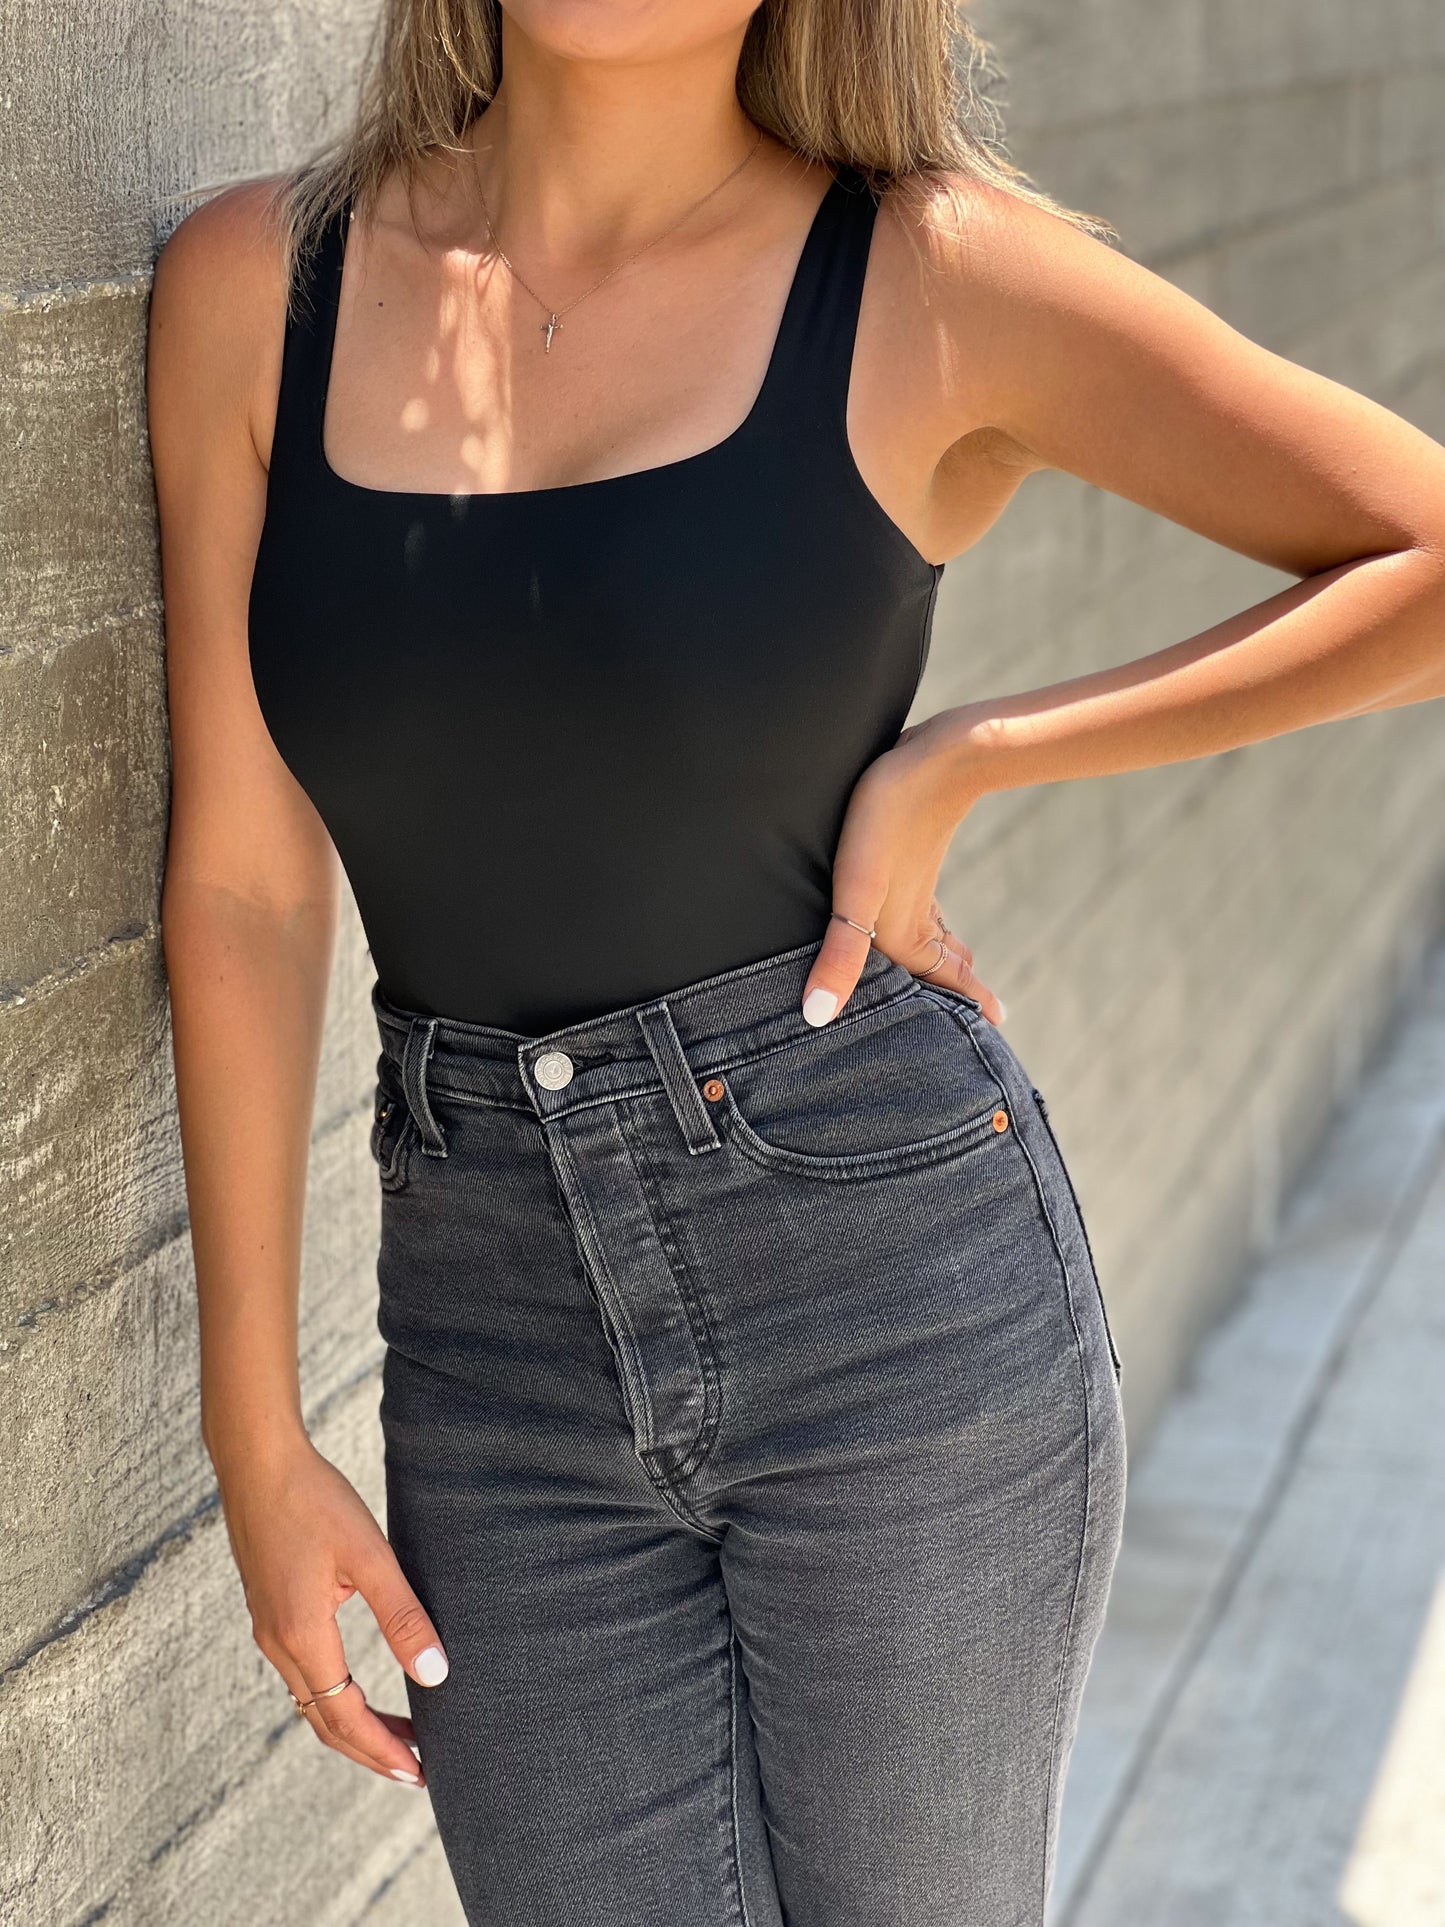 A brown skinned latina model is wearing a black bodysuit that has a squared neckline. She has one arm on her waist and the other touching her pants. Its a close-up shot of the top. Her face isnt showing.